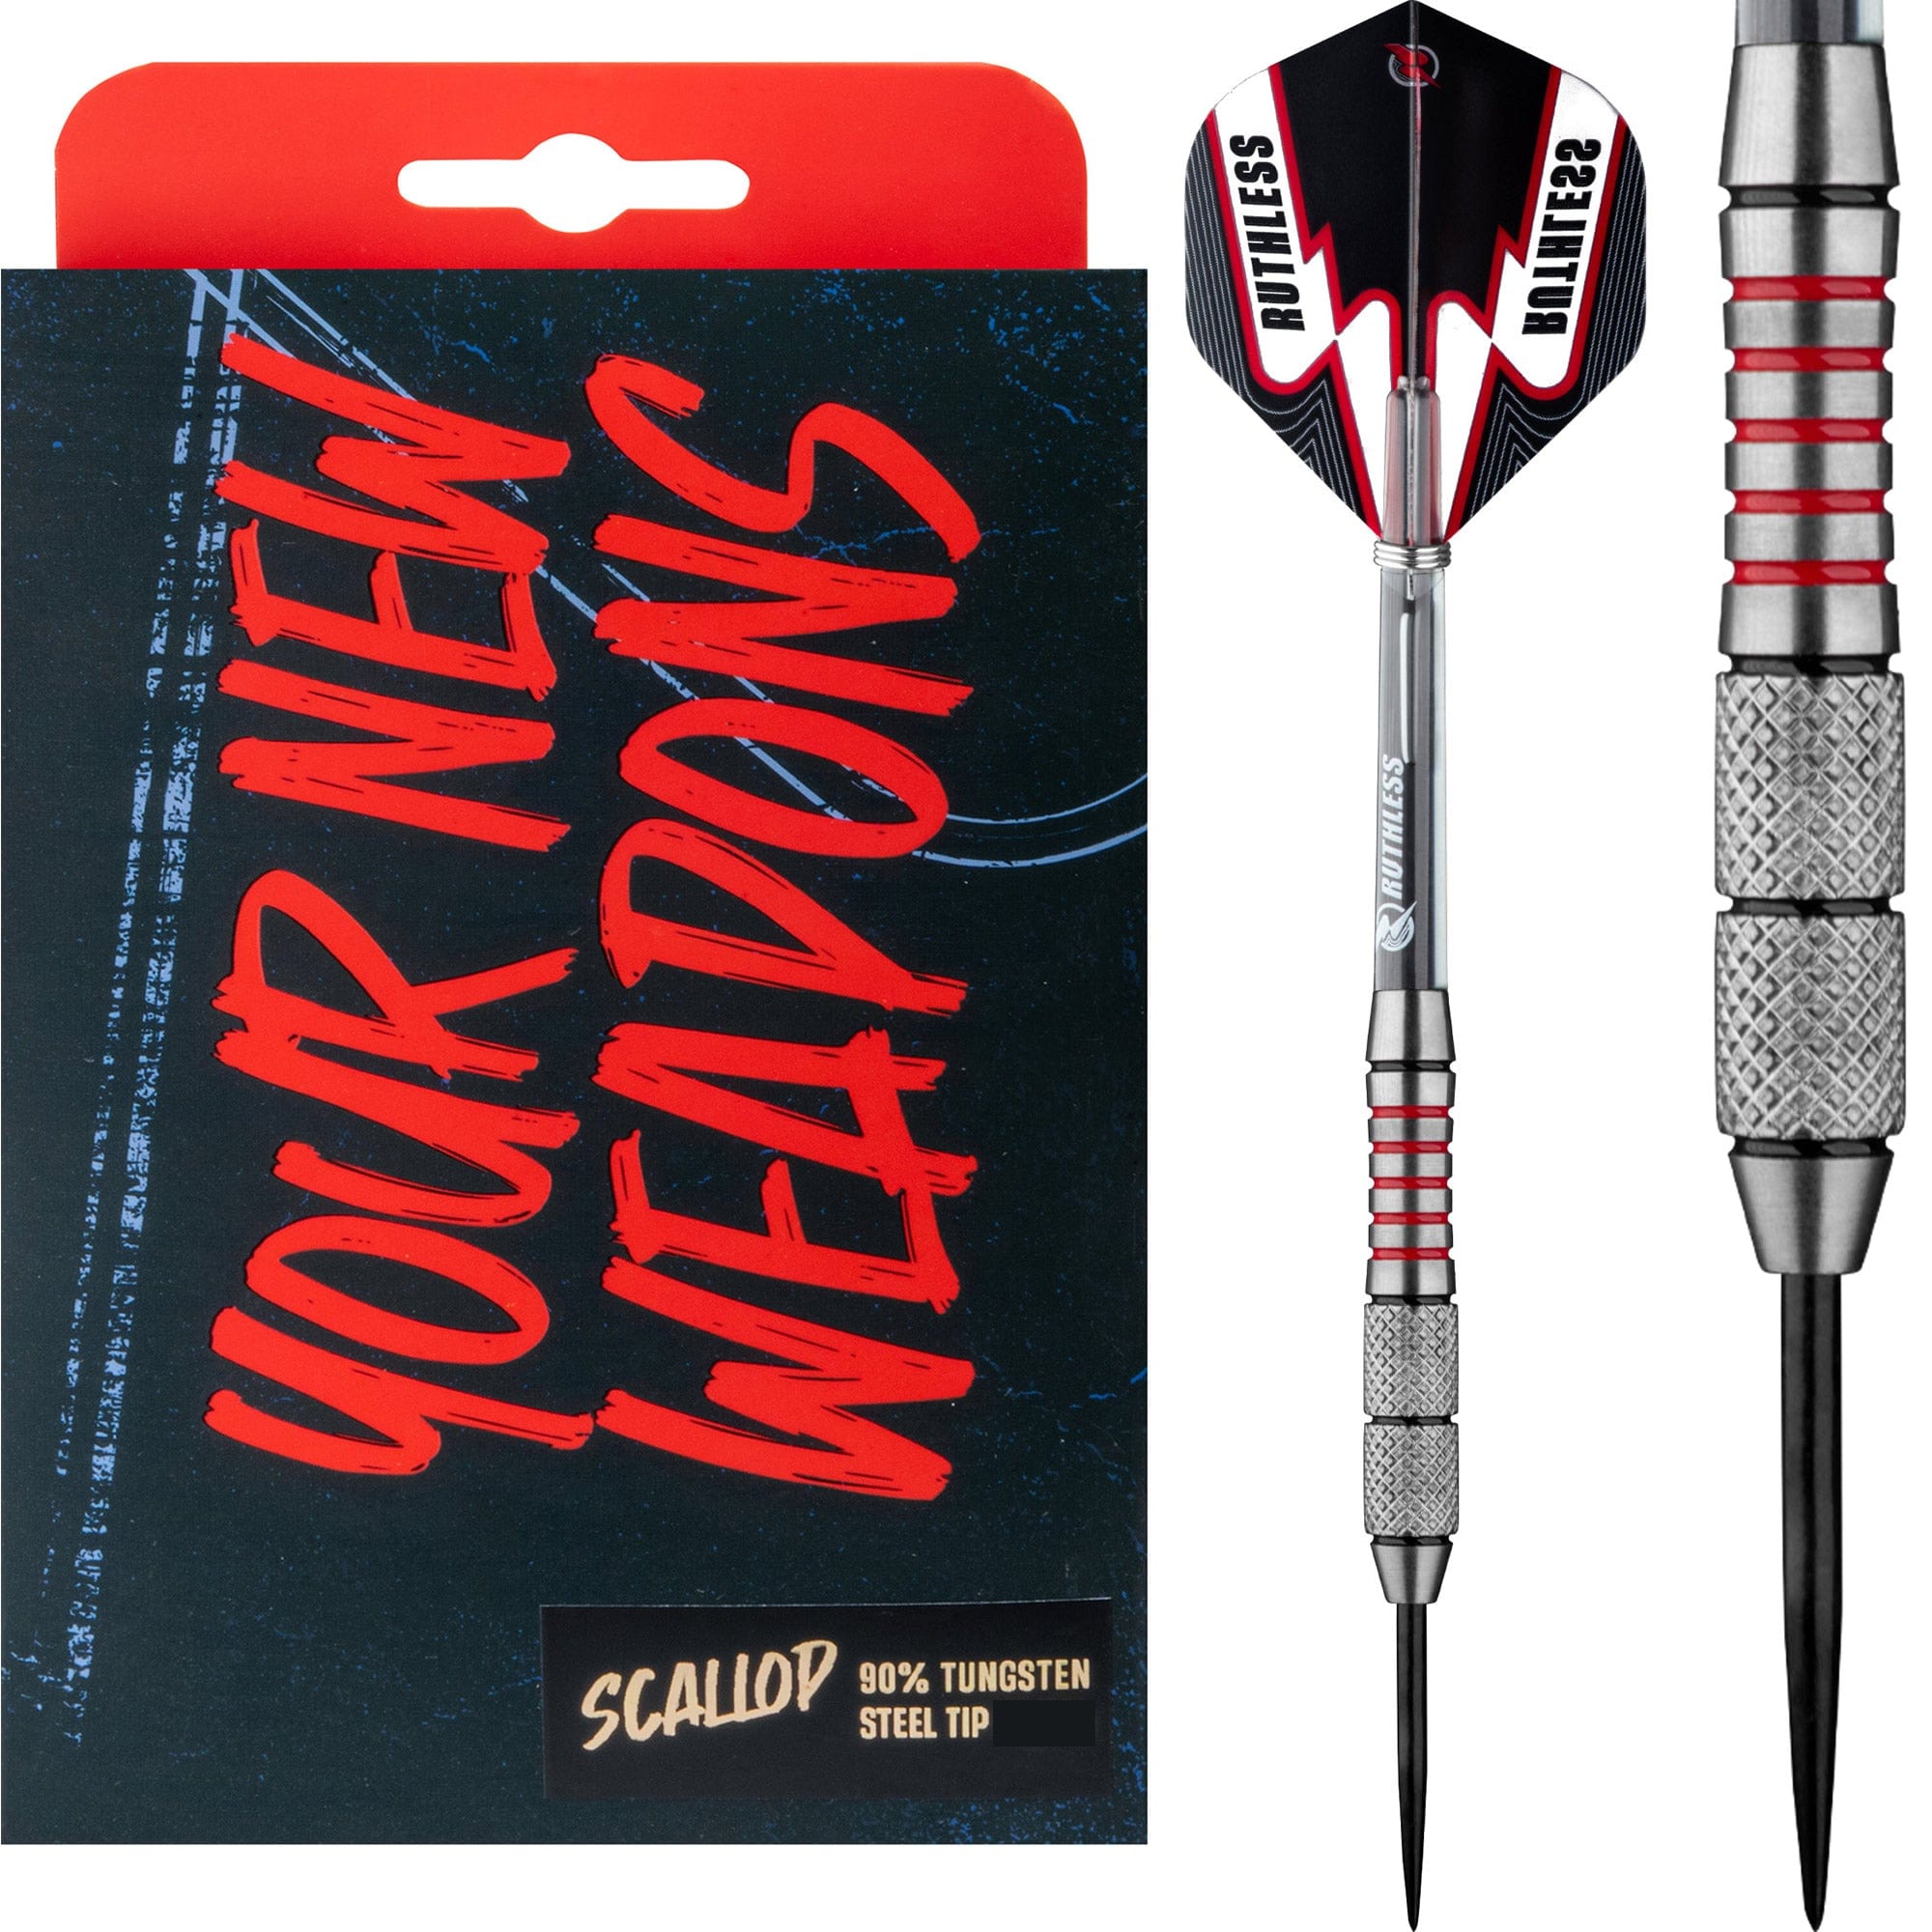 Ruthless Scallop Darts - Steel Tip - Front Knurl - Black & Red - 23g